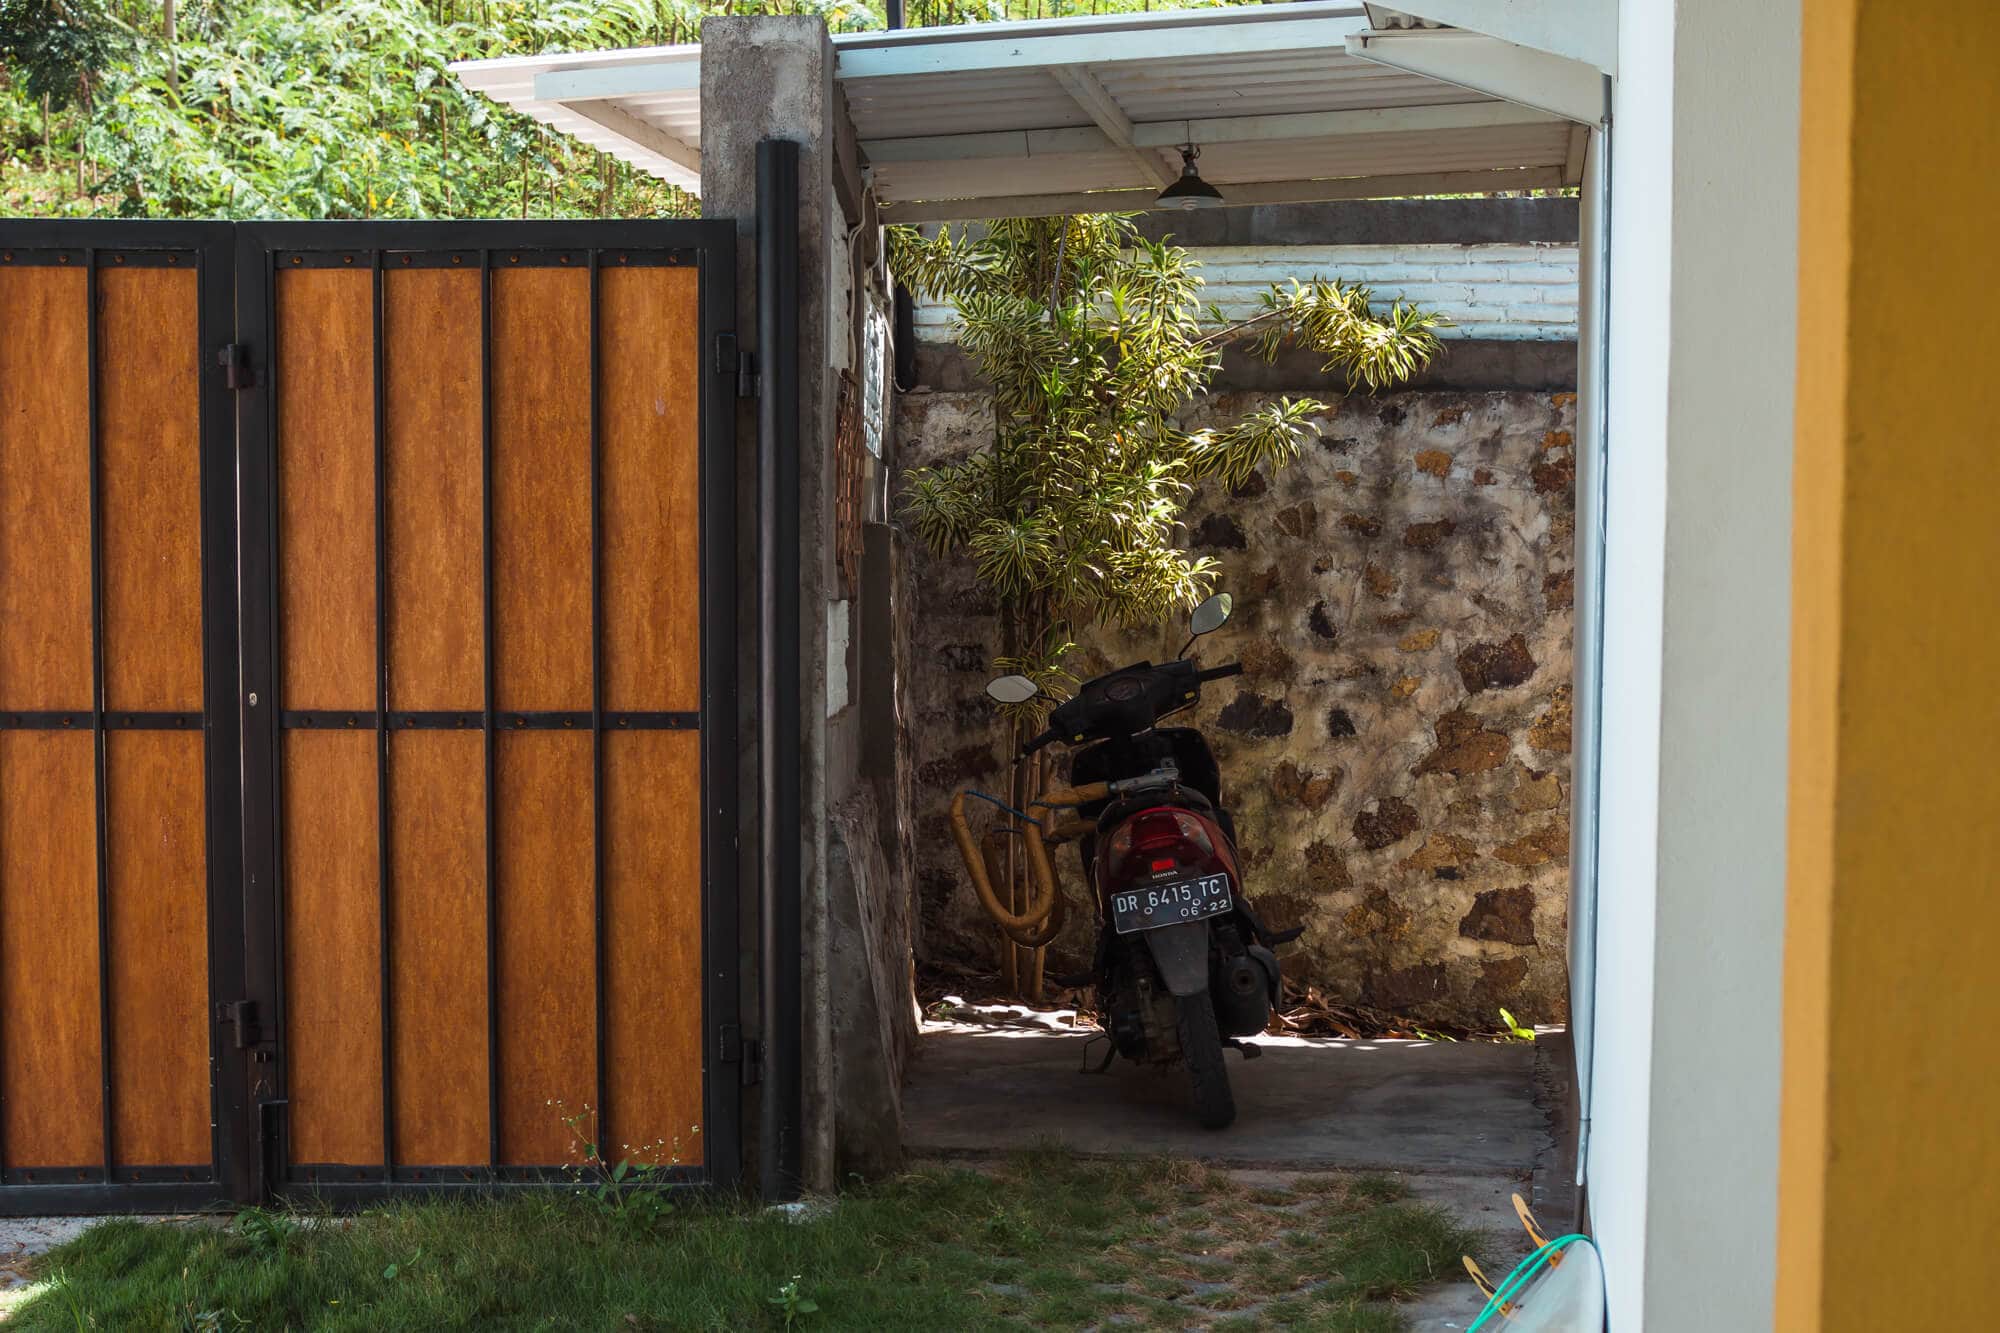 Follow along on our journey living in Kuta, Lombok for two months - House/villa tour.